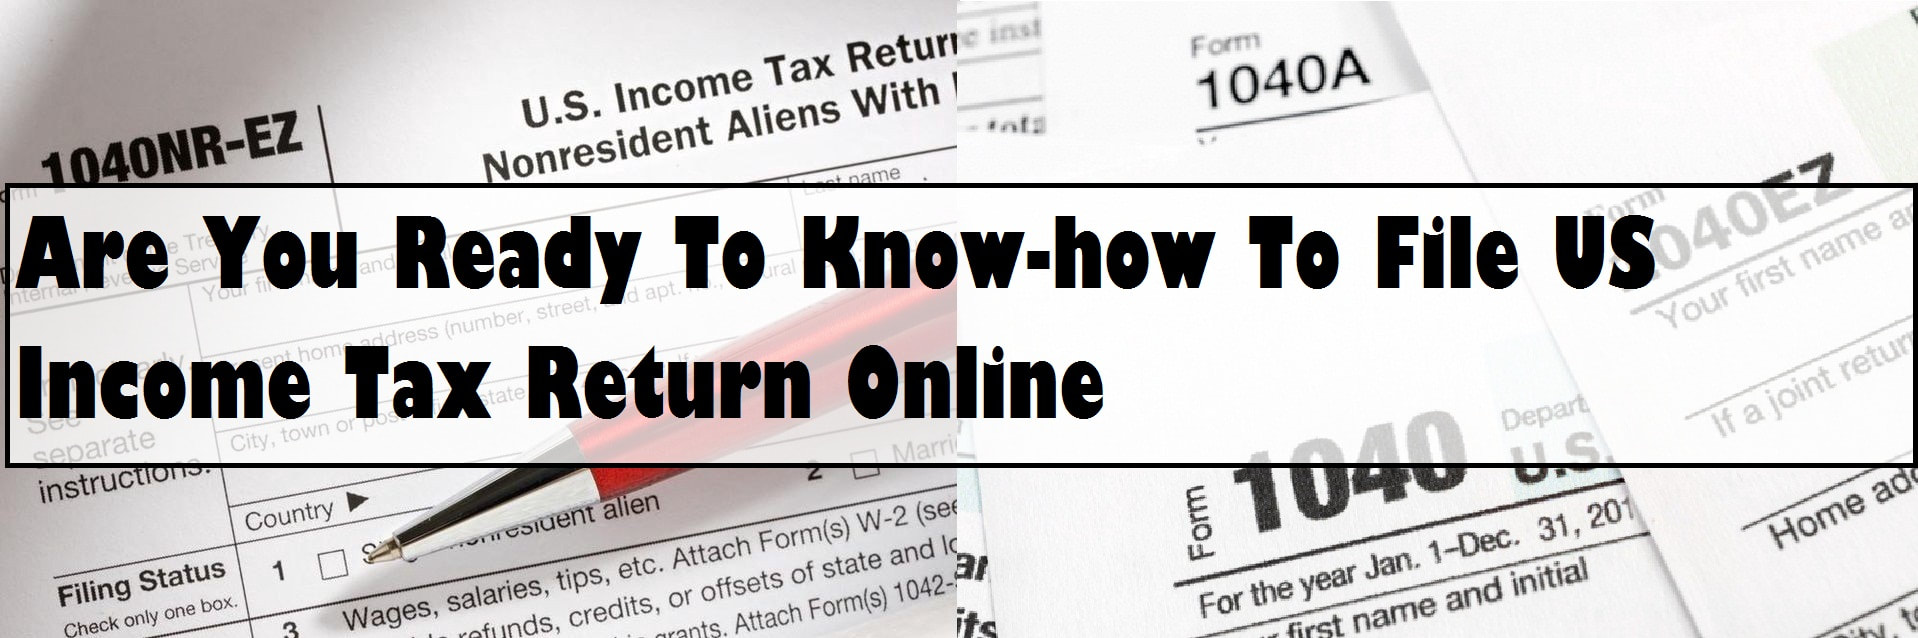 How To File Us Income Tax Return Online